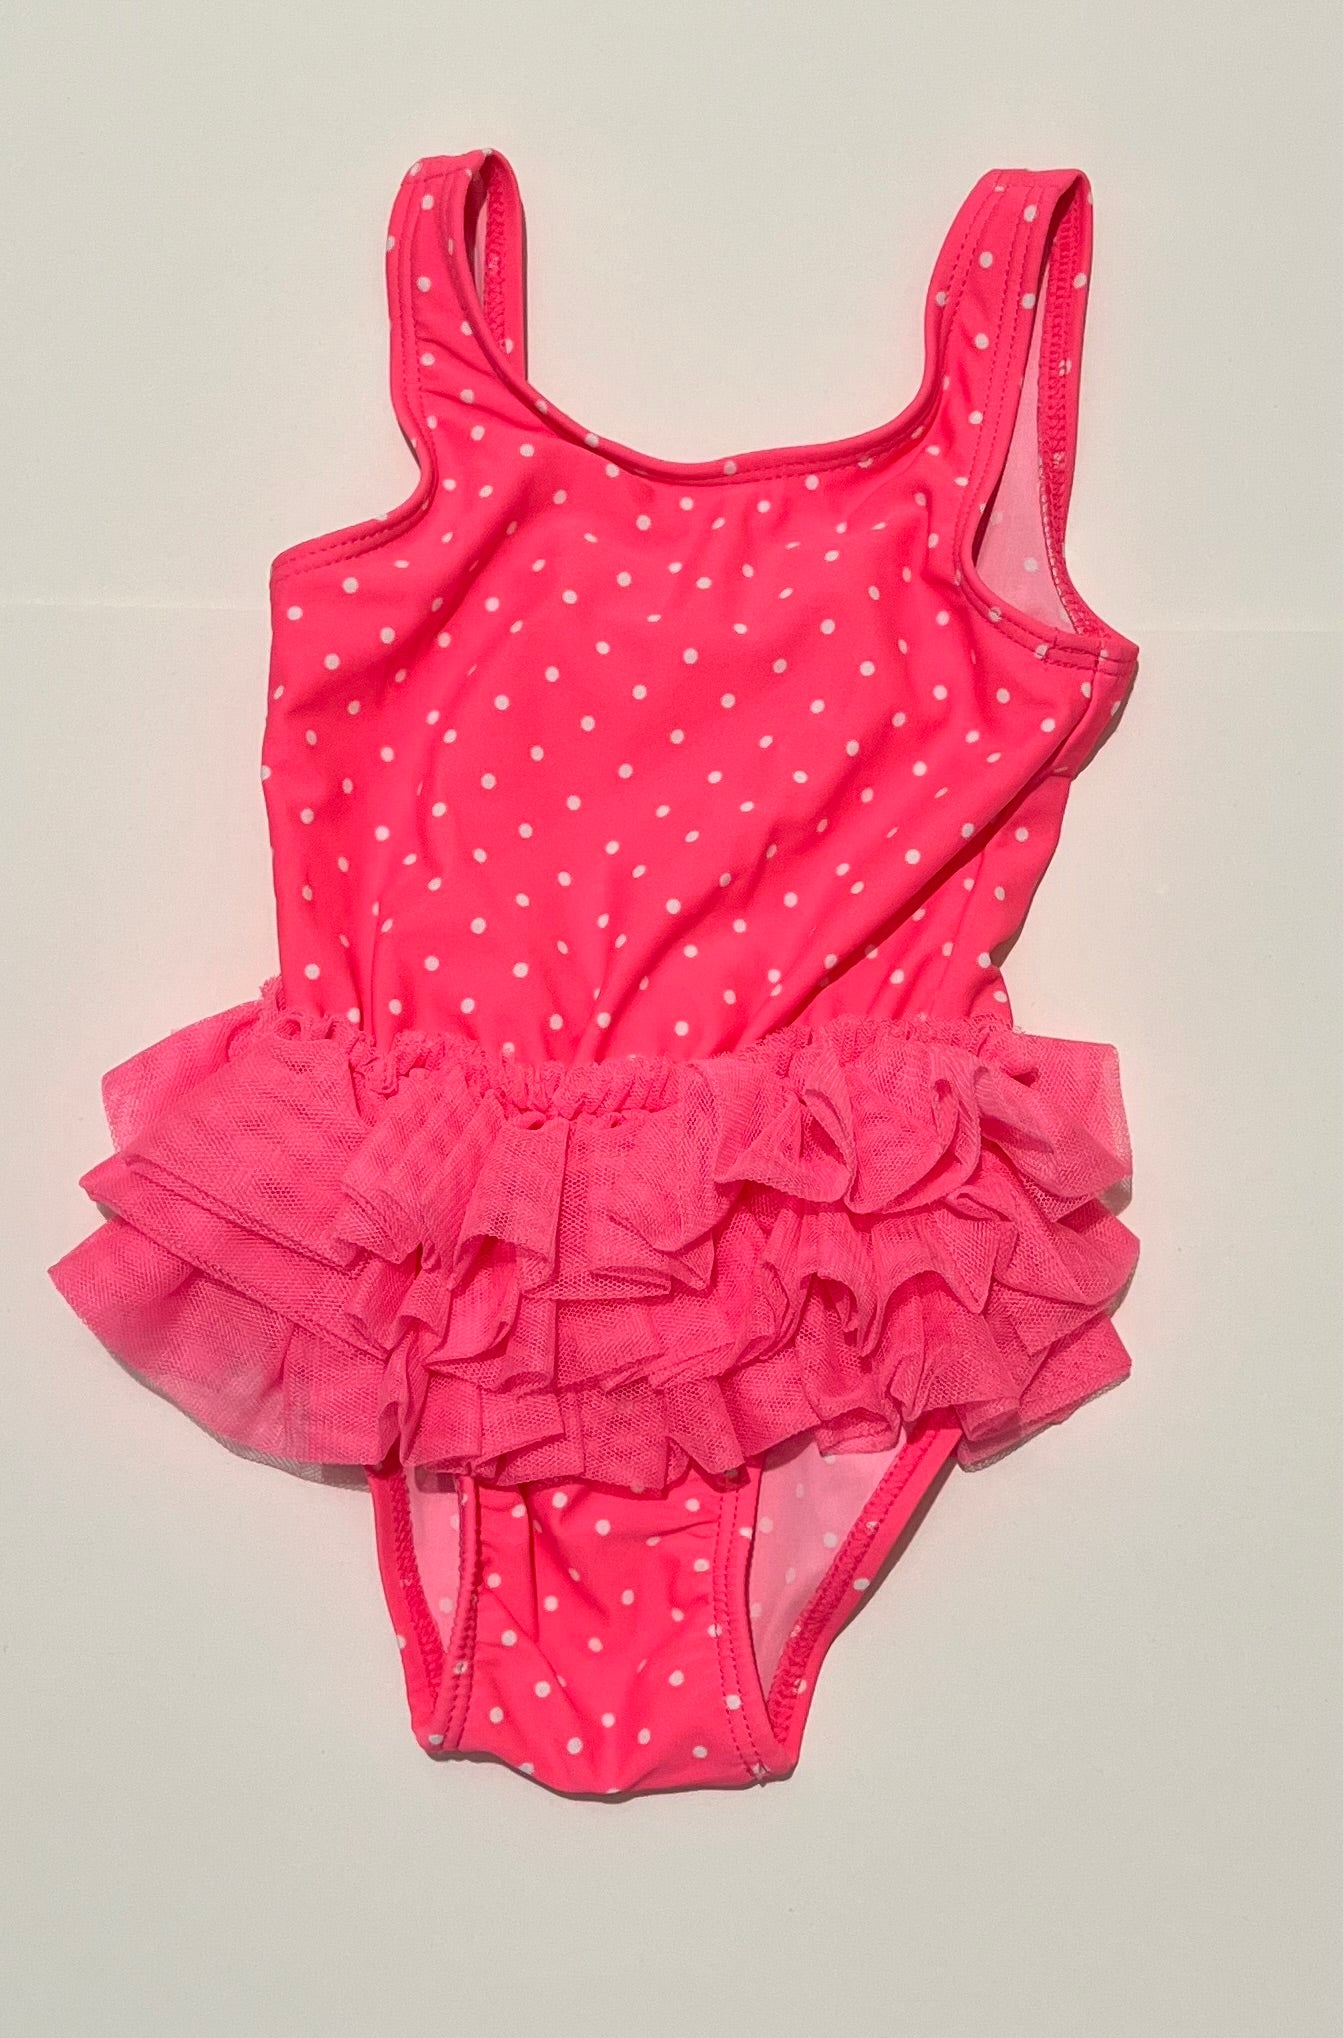 Bathing Suit Girls 9 months Pink Polka Dots with Ruffle Skirt